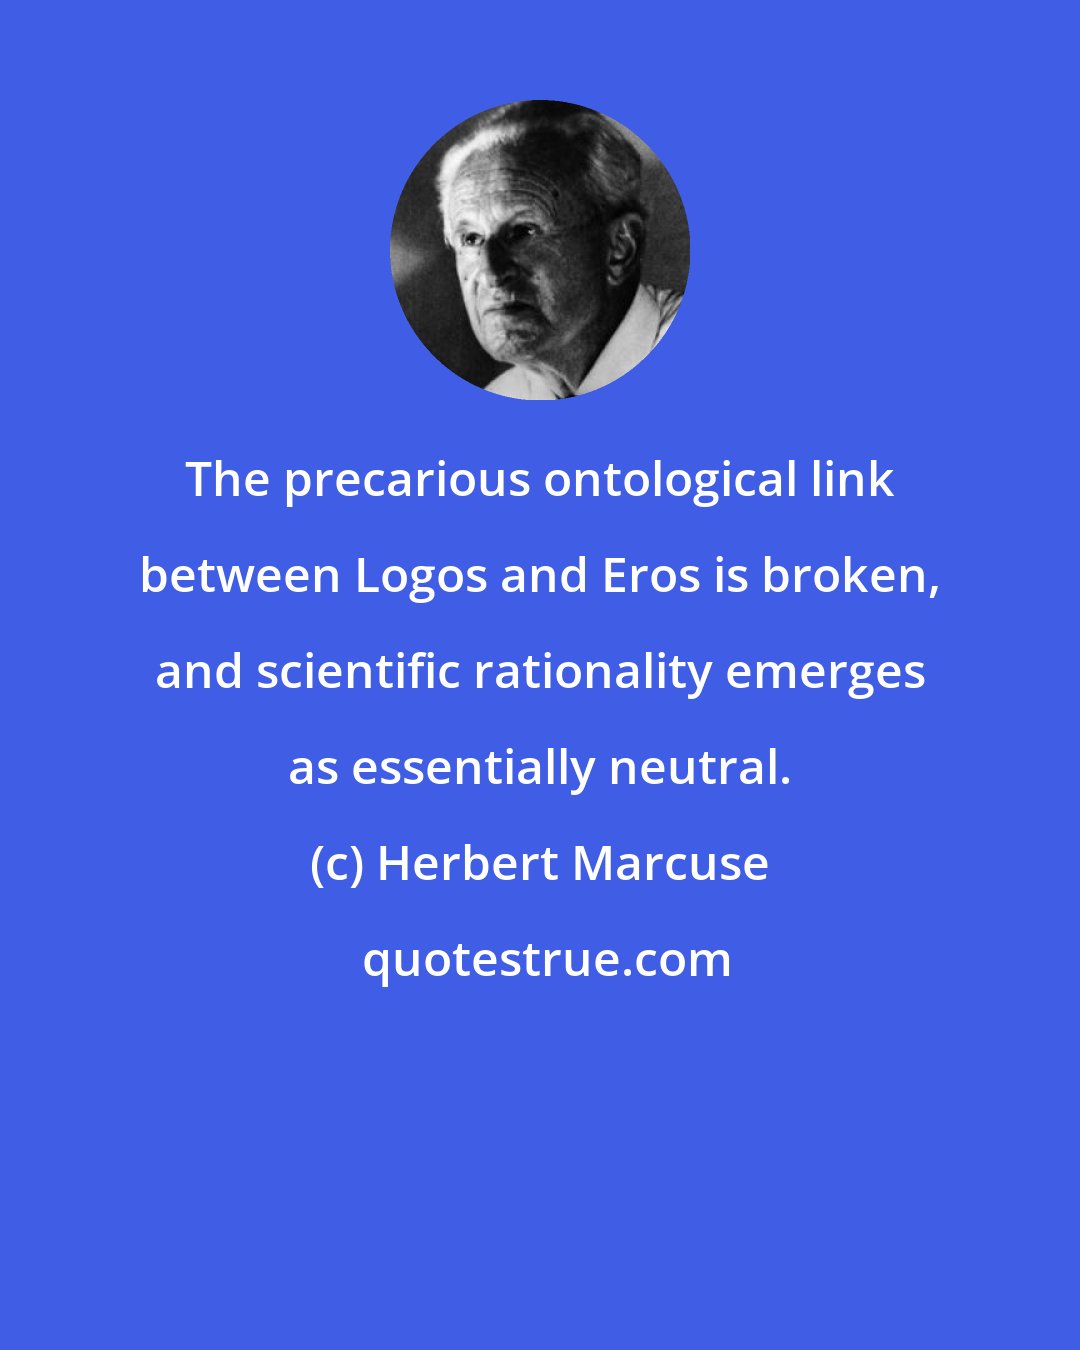 Herbert Marcuse: The precarious ontological link between Logos and Eros is broken, and scientific rationality emerges as essentially neutral.